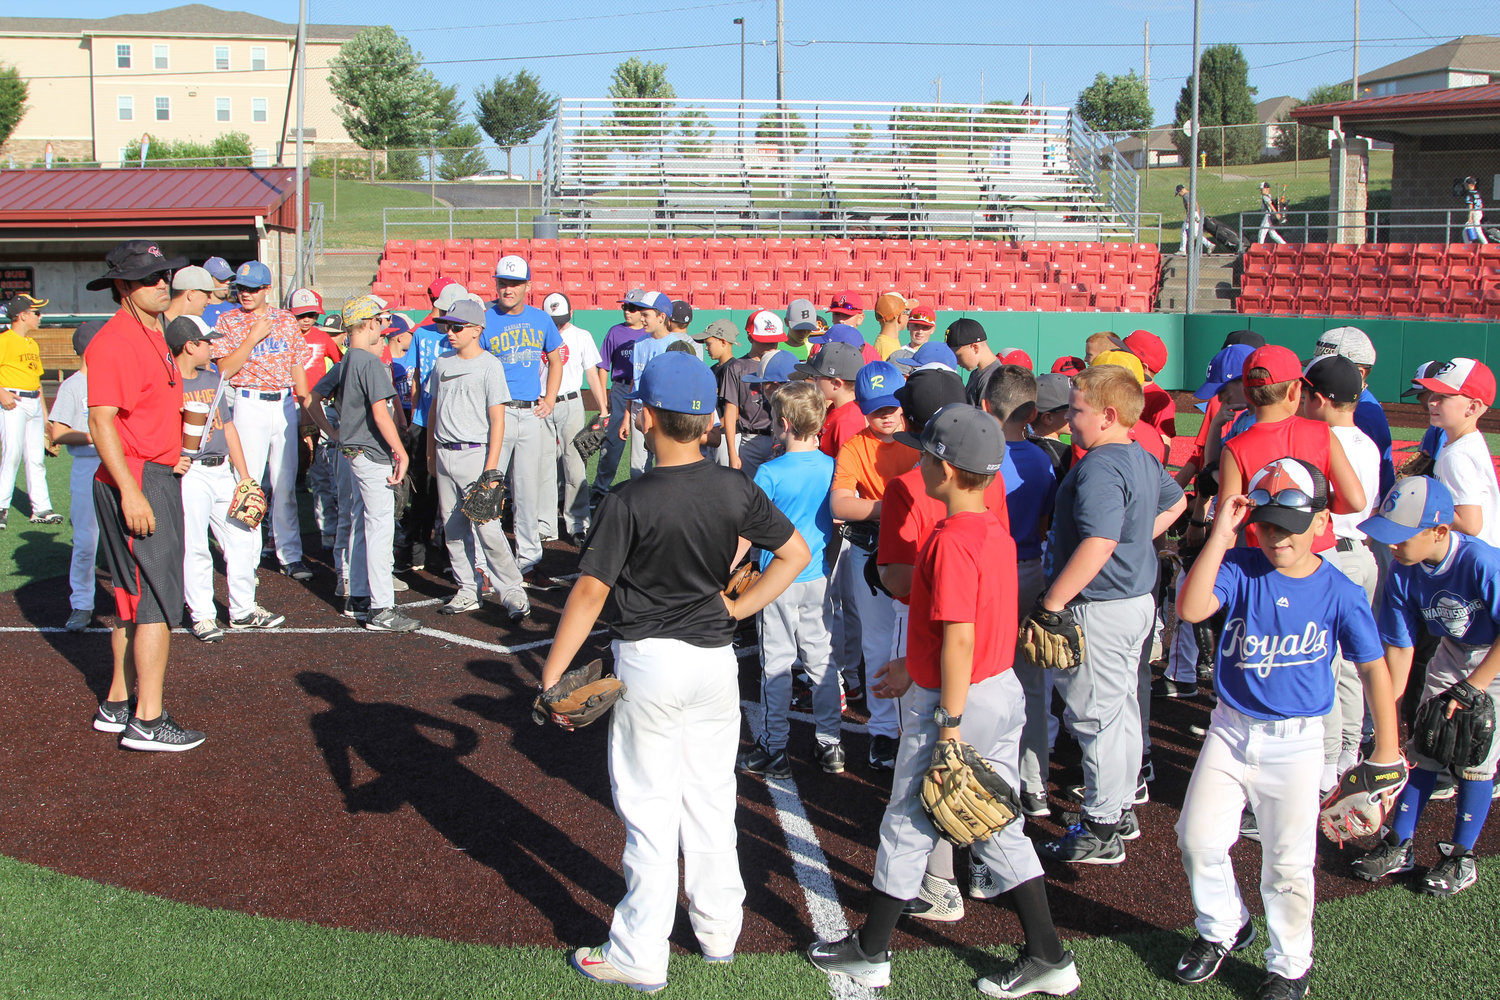 Youth baseball players tune their skills at summer camp StarJournal